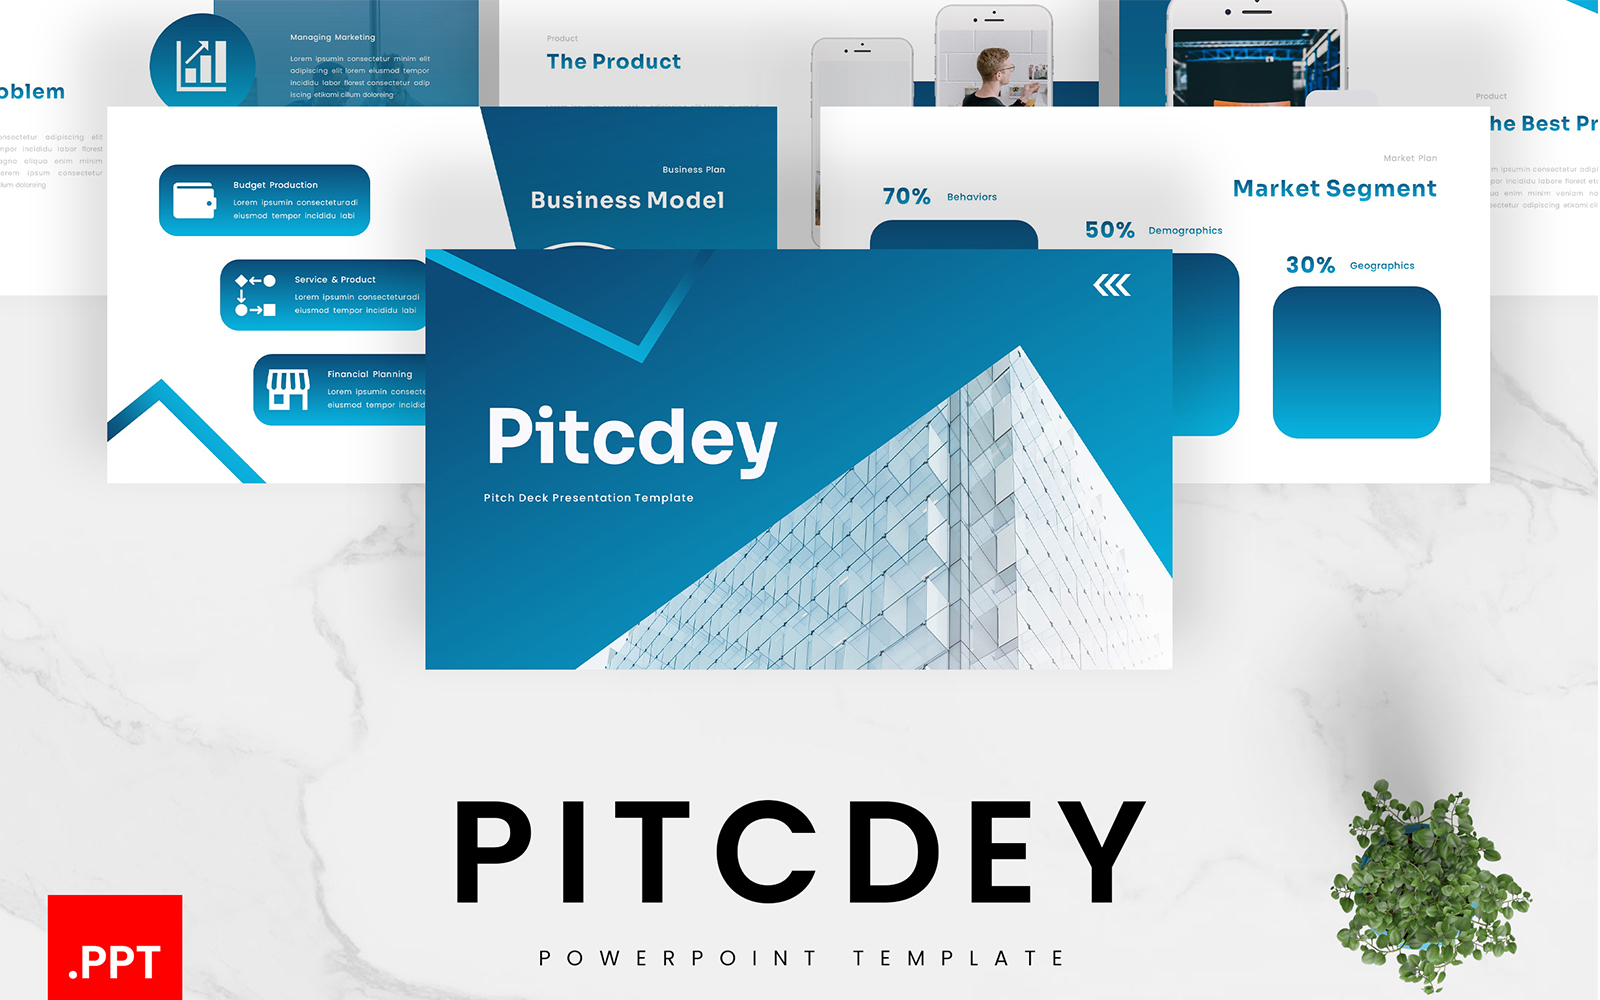 Pitcdey – Pitch Deck PowerPoint Template